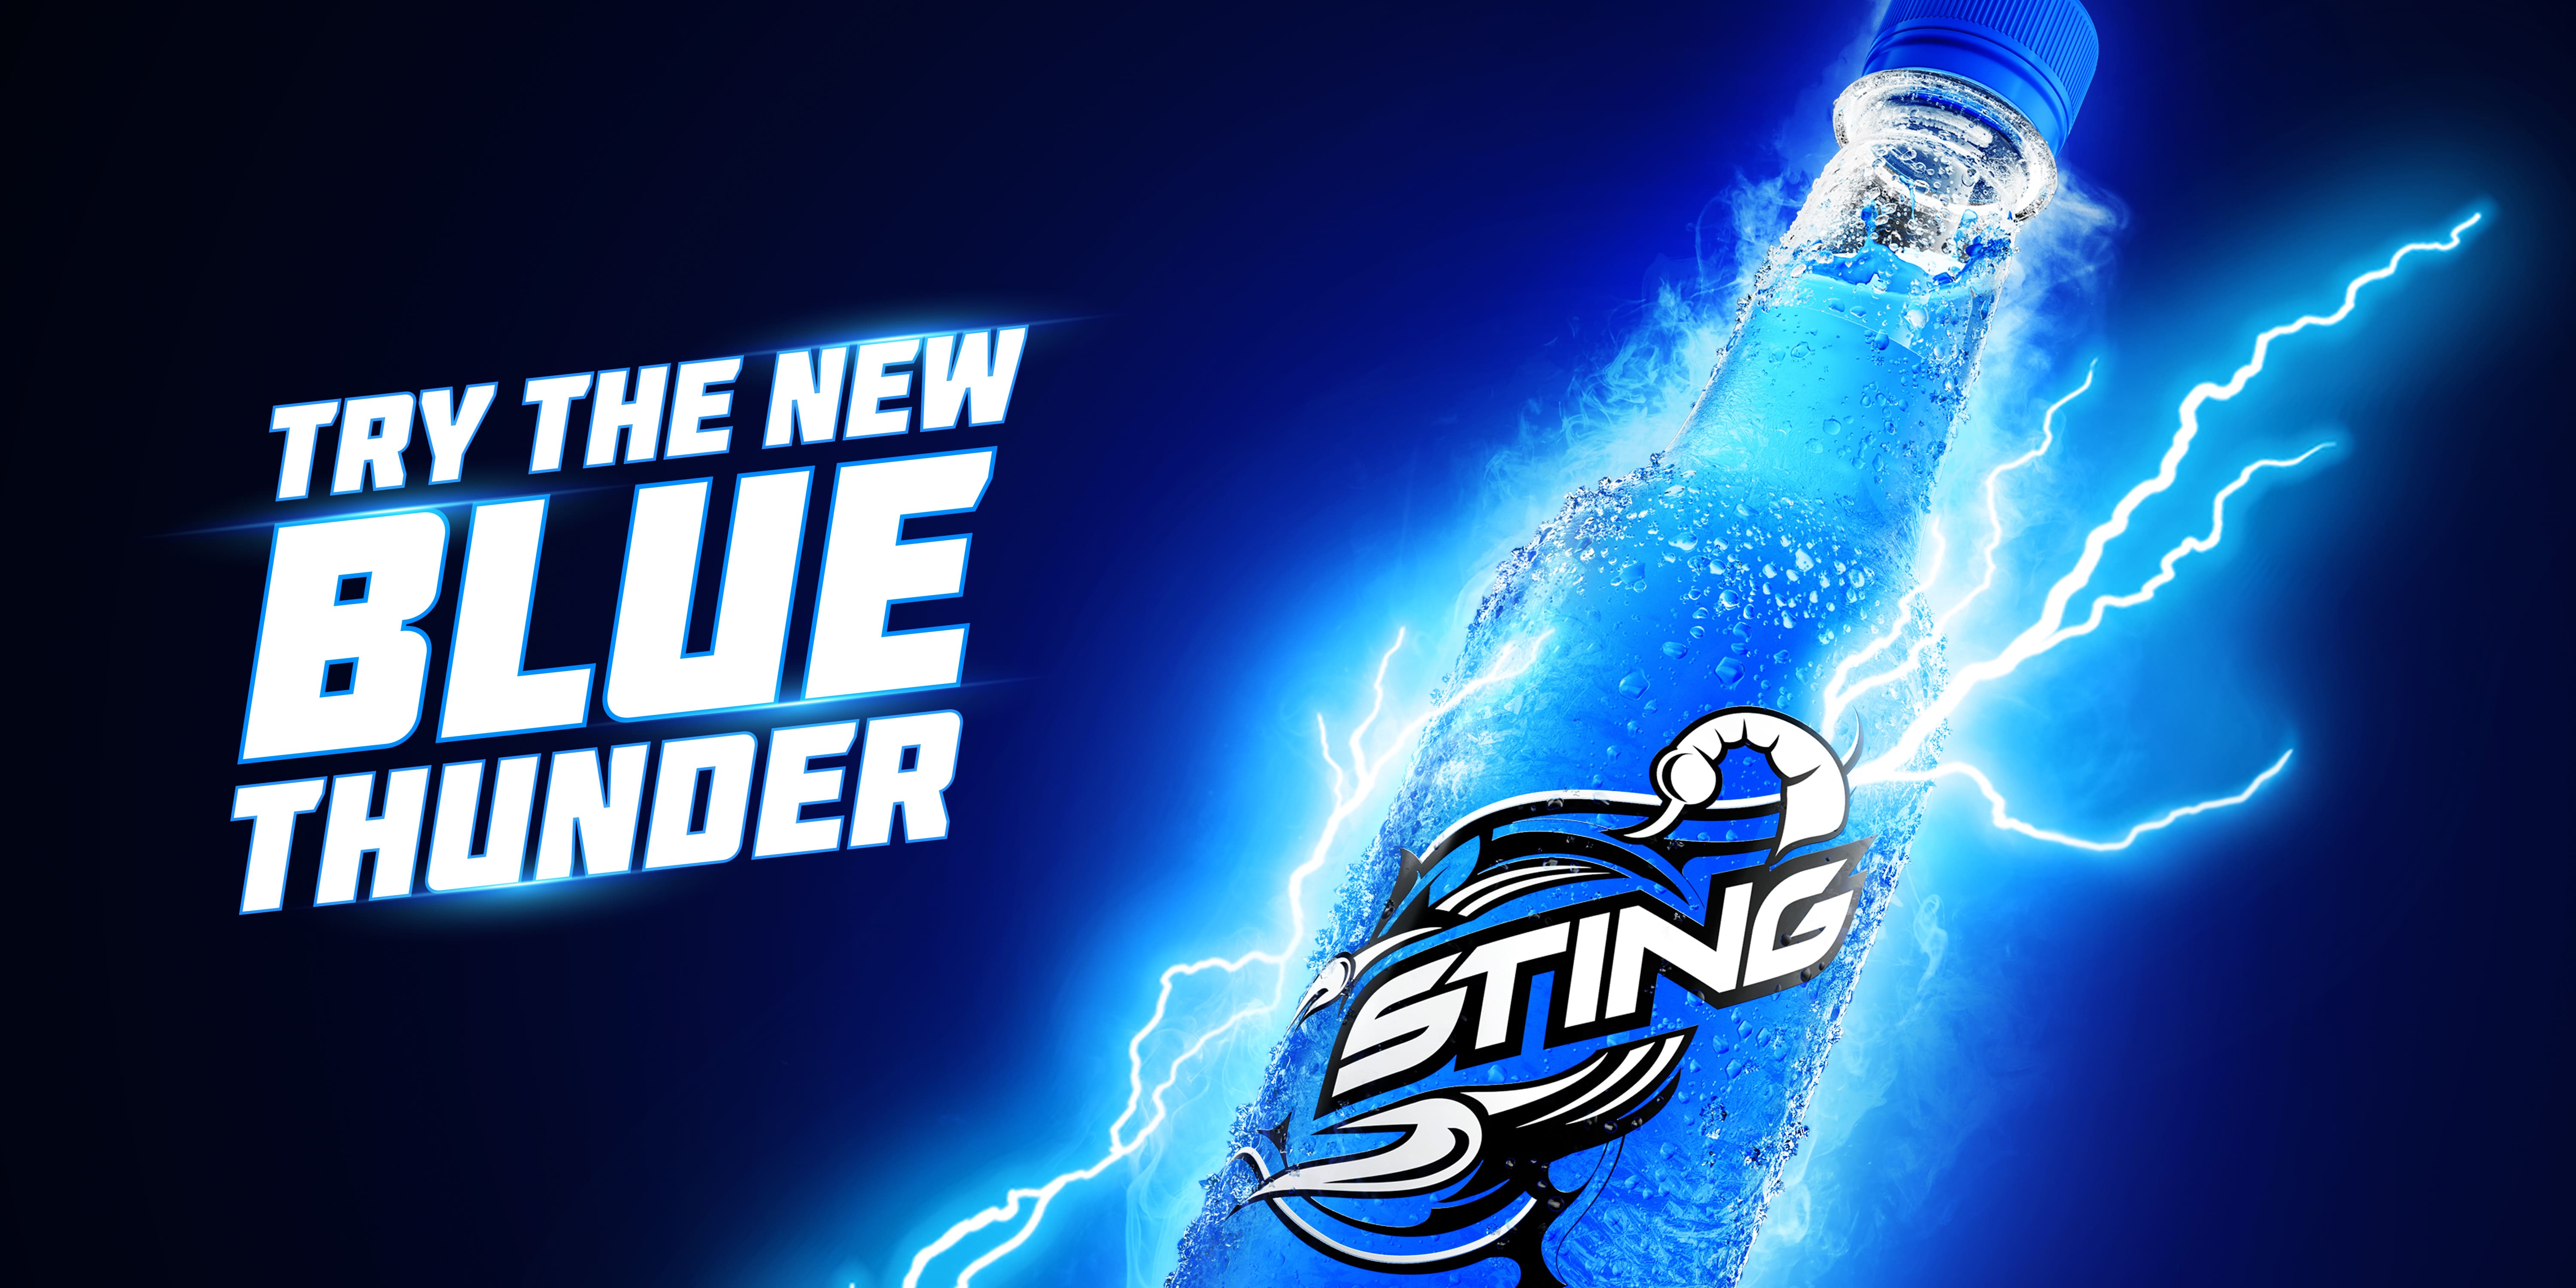 Stormbrands’ Supercharged Creative for Blue Thunder Variant of Pepsico’s Sting Energy Drink